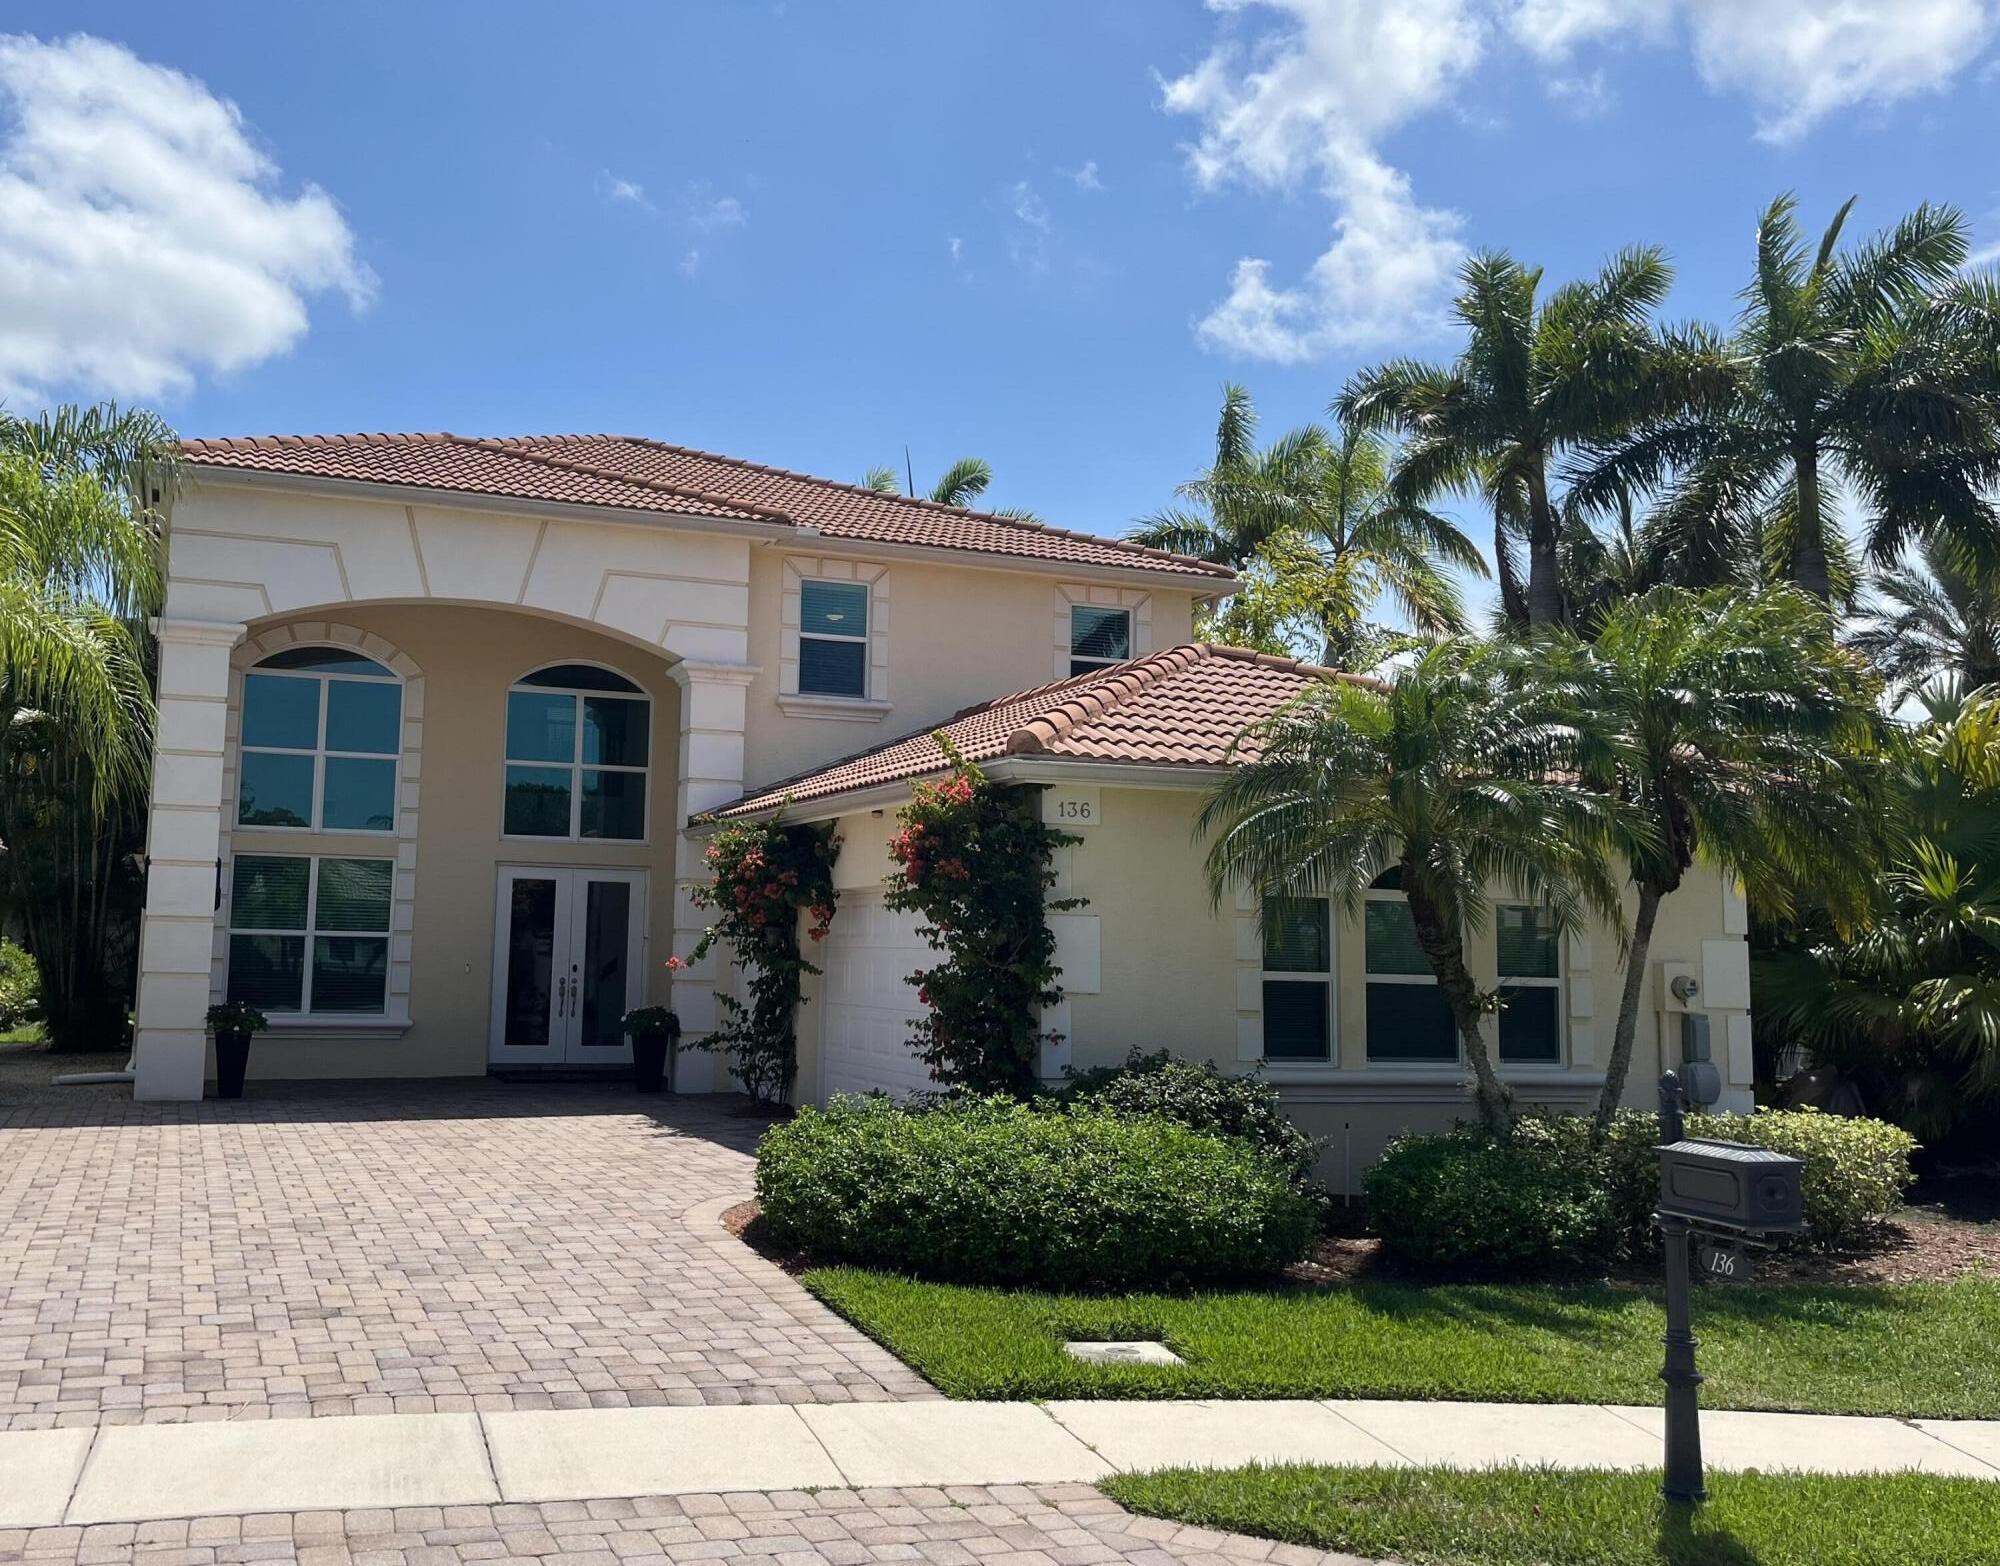 Property for Sale at 136 Casa Grande Court, Palm Beach Gardens, Palm Beach County, Florida - Bedrooms: 5 
Bathrooms: 3.5  - $1,129,000